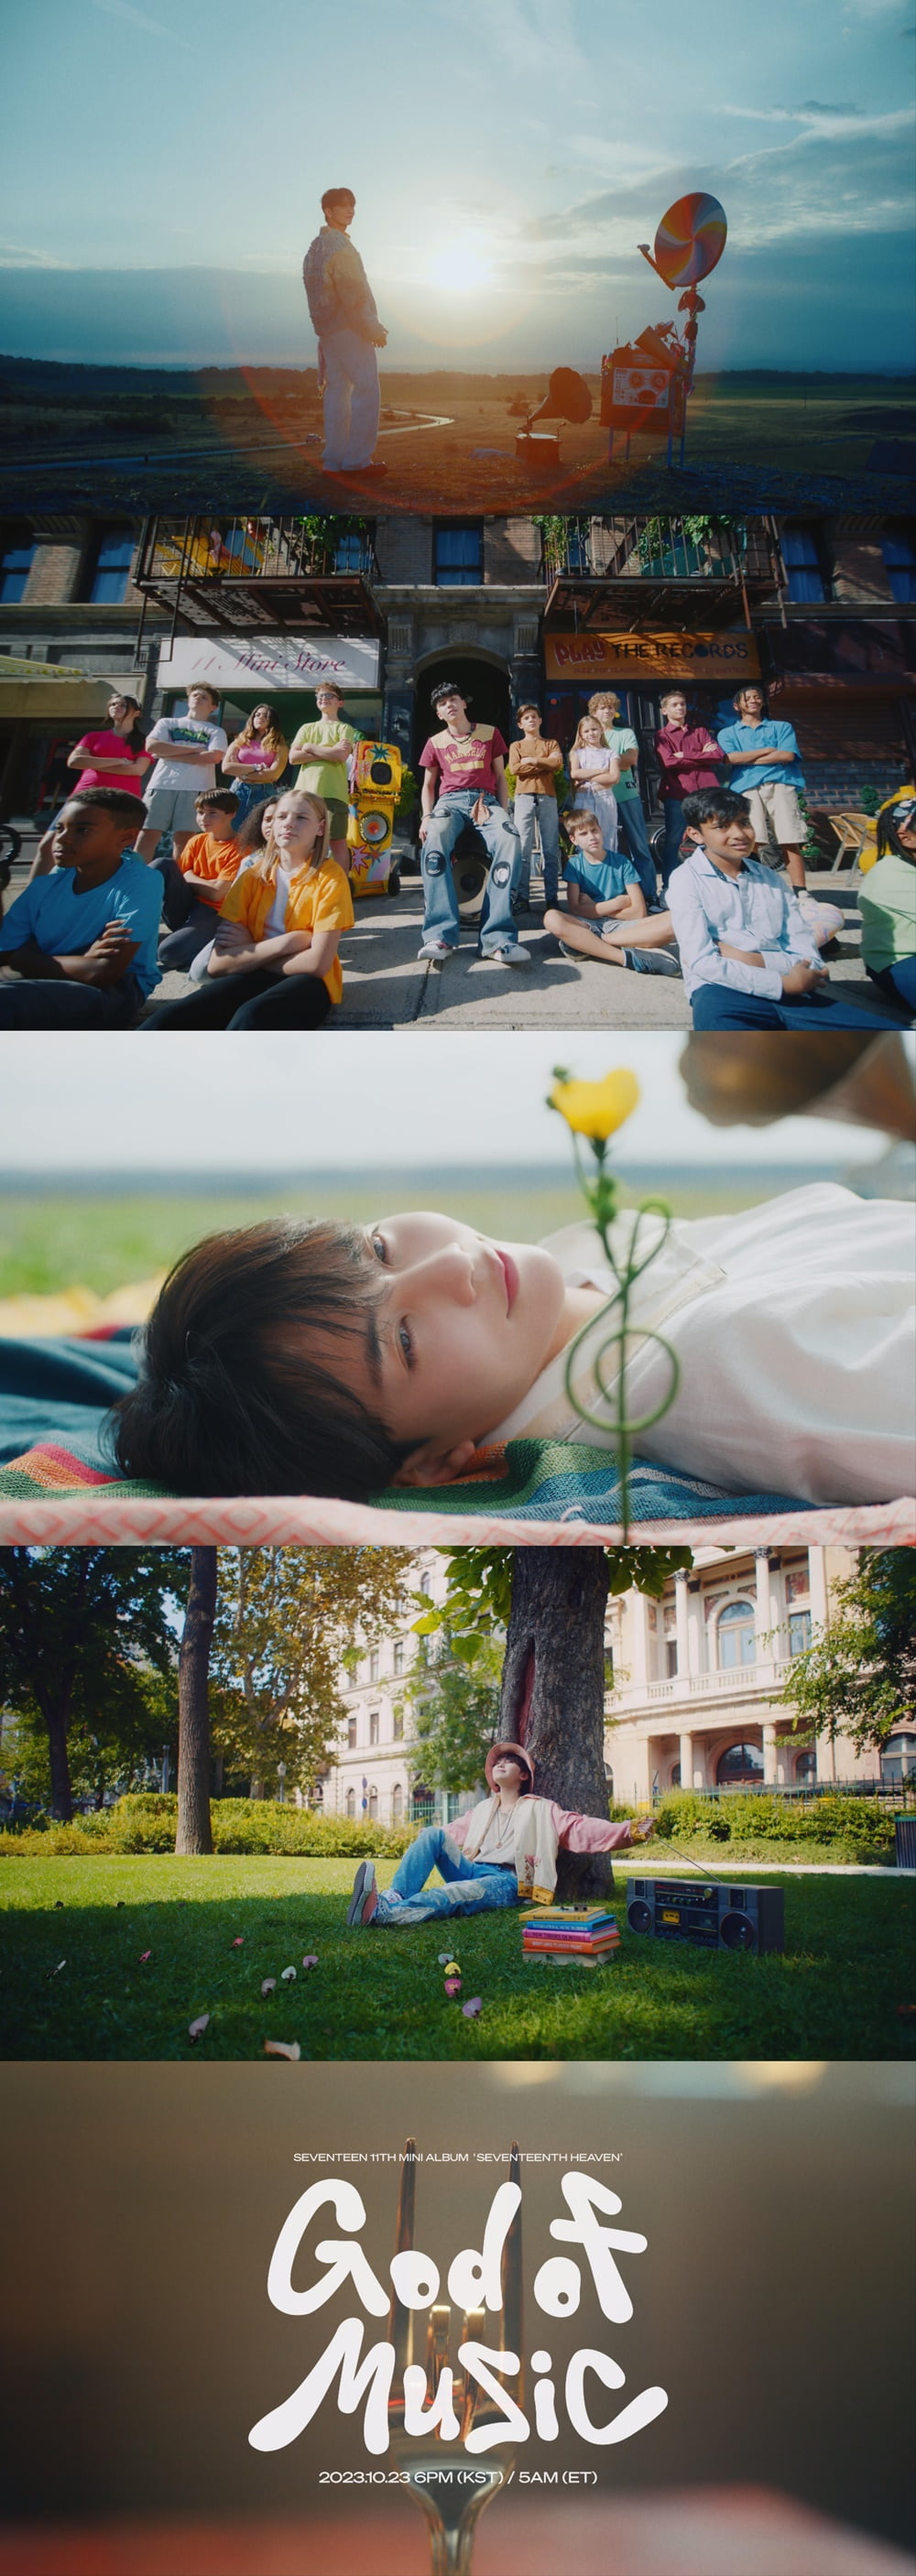 ‘Comeback on the 23rd’ Seventeen releases MV teaser for title song ‘God of Music’… A preview of a ‘giant festival’